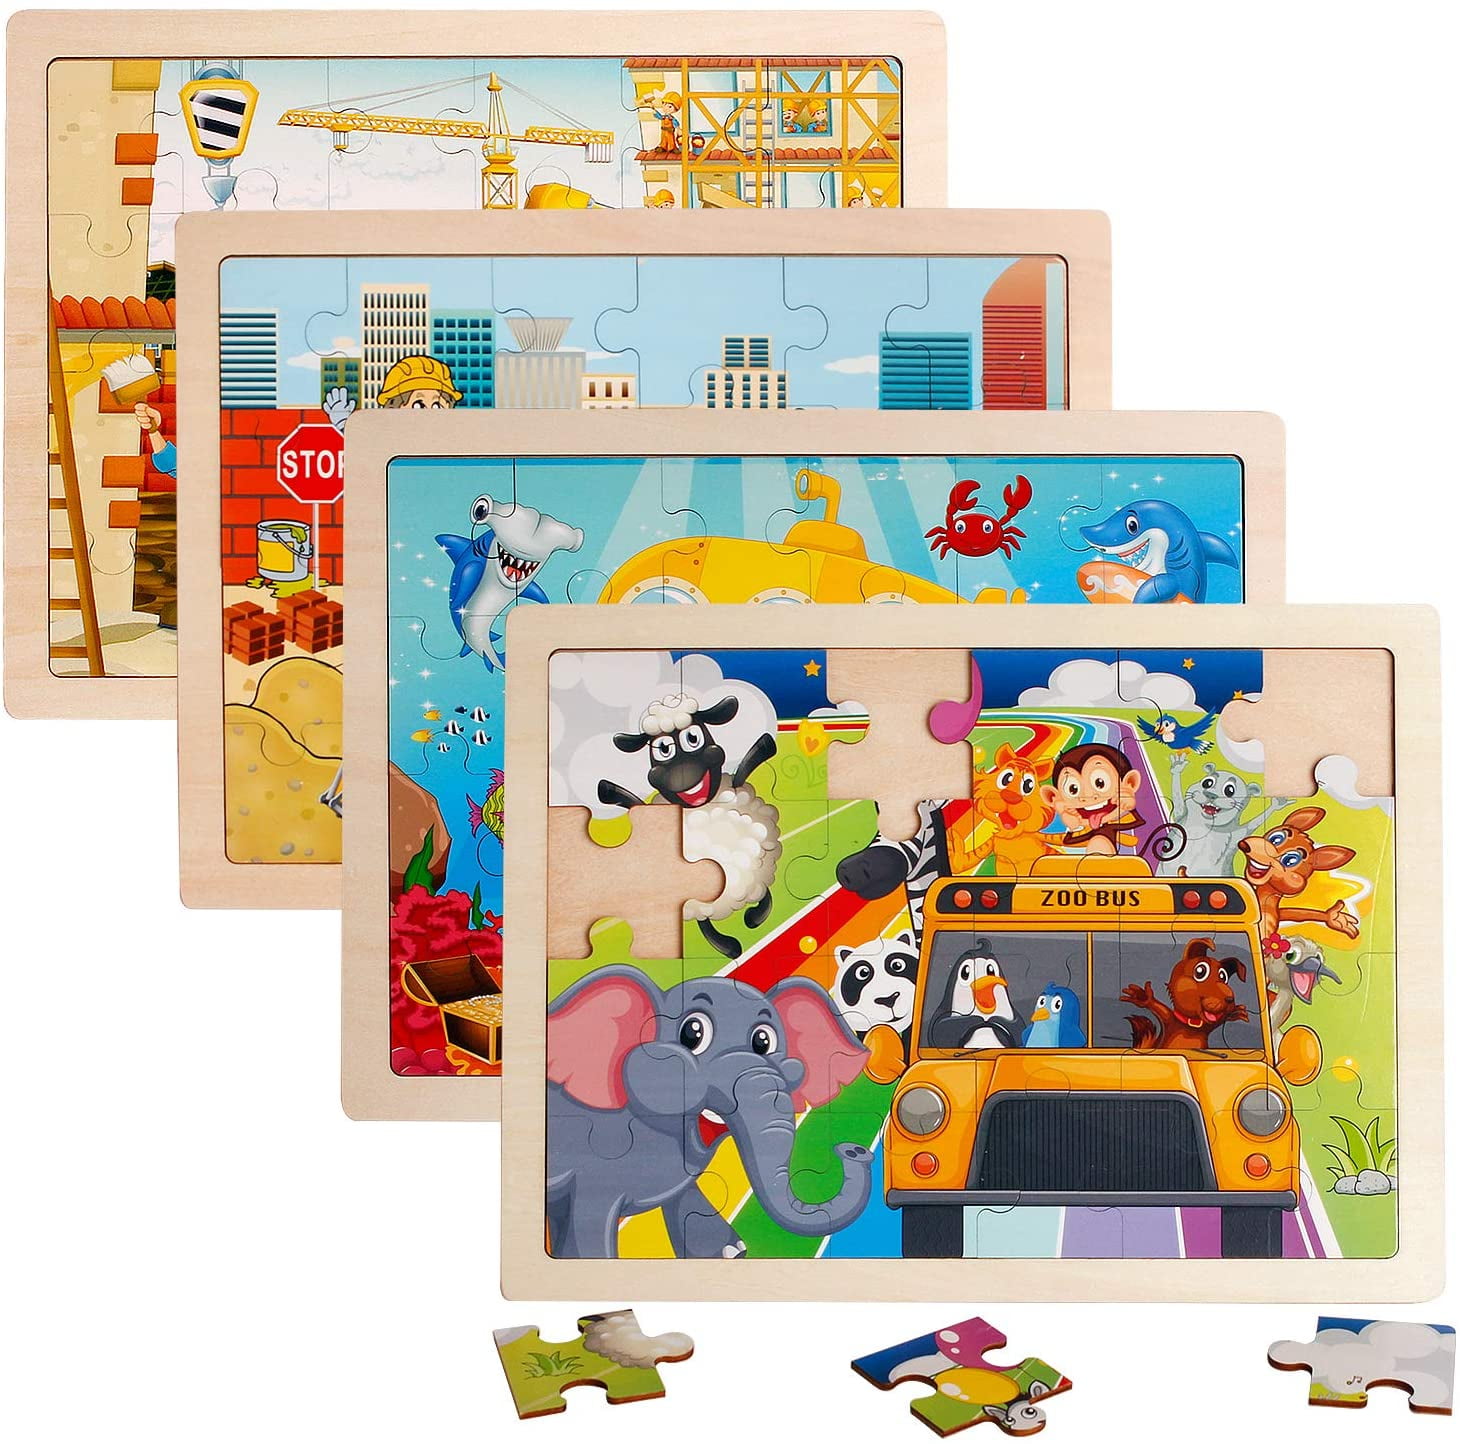 4 Packs 24 PCs Jigsaw Puzzles for Kids Preschool Educational Brain Teaser Boards Toys Animal Zoo Bus Marine World Construction Sites Children Enlightenment 3 Years Old and Up 